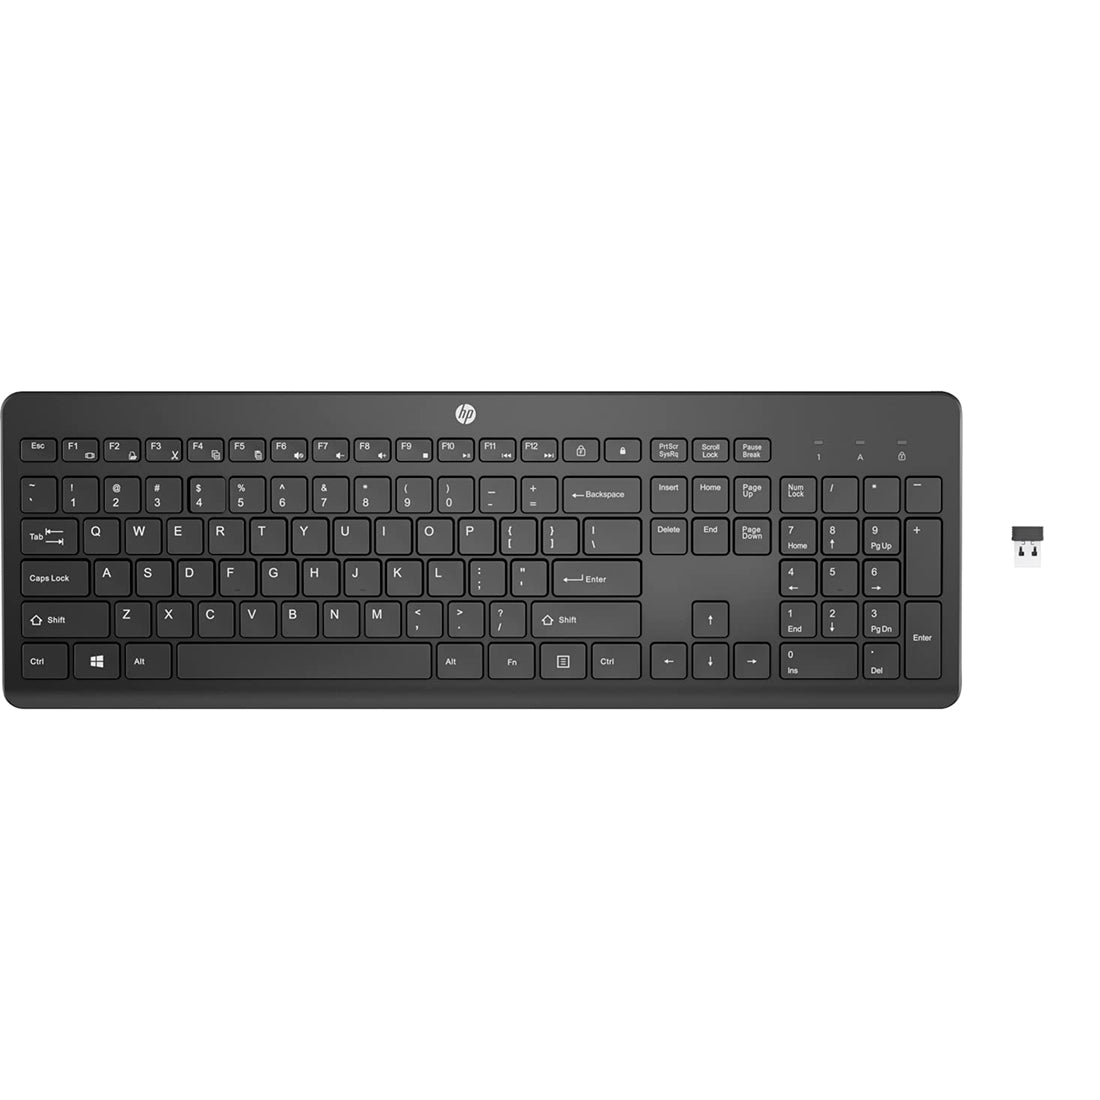 HP 230 Wireless Keyboard with 2.4GHz Wireless Connectivity and 12 Function Keys